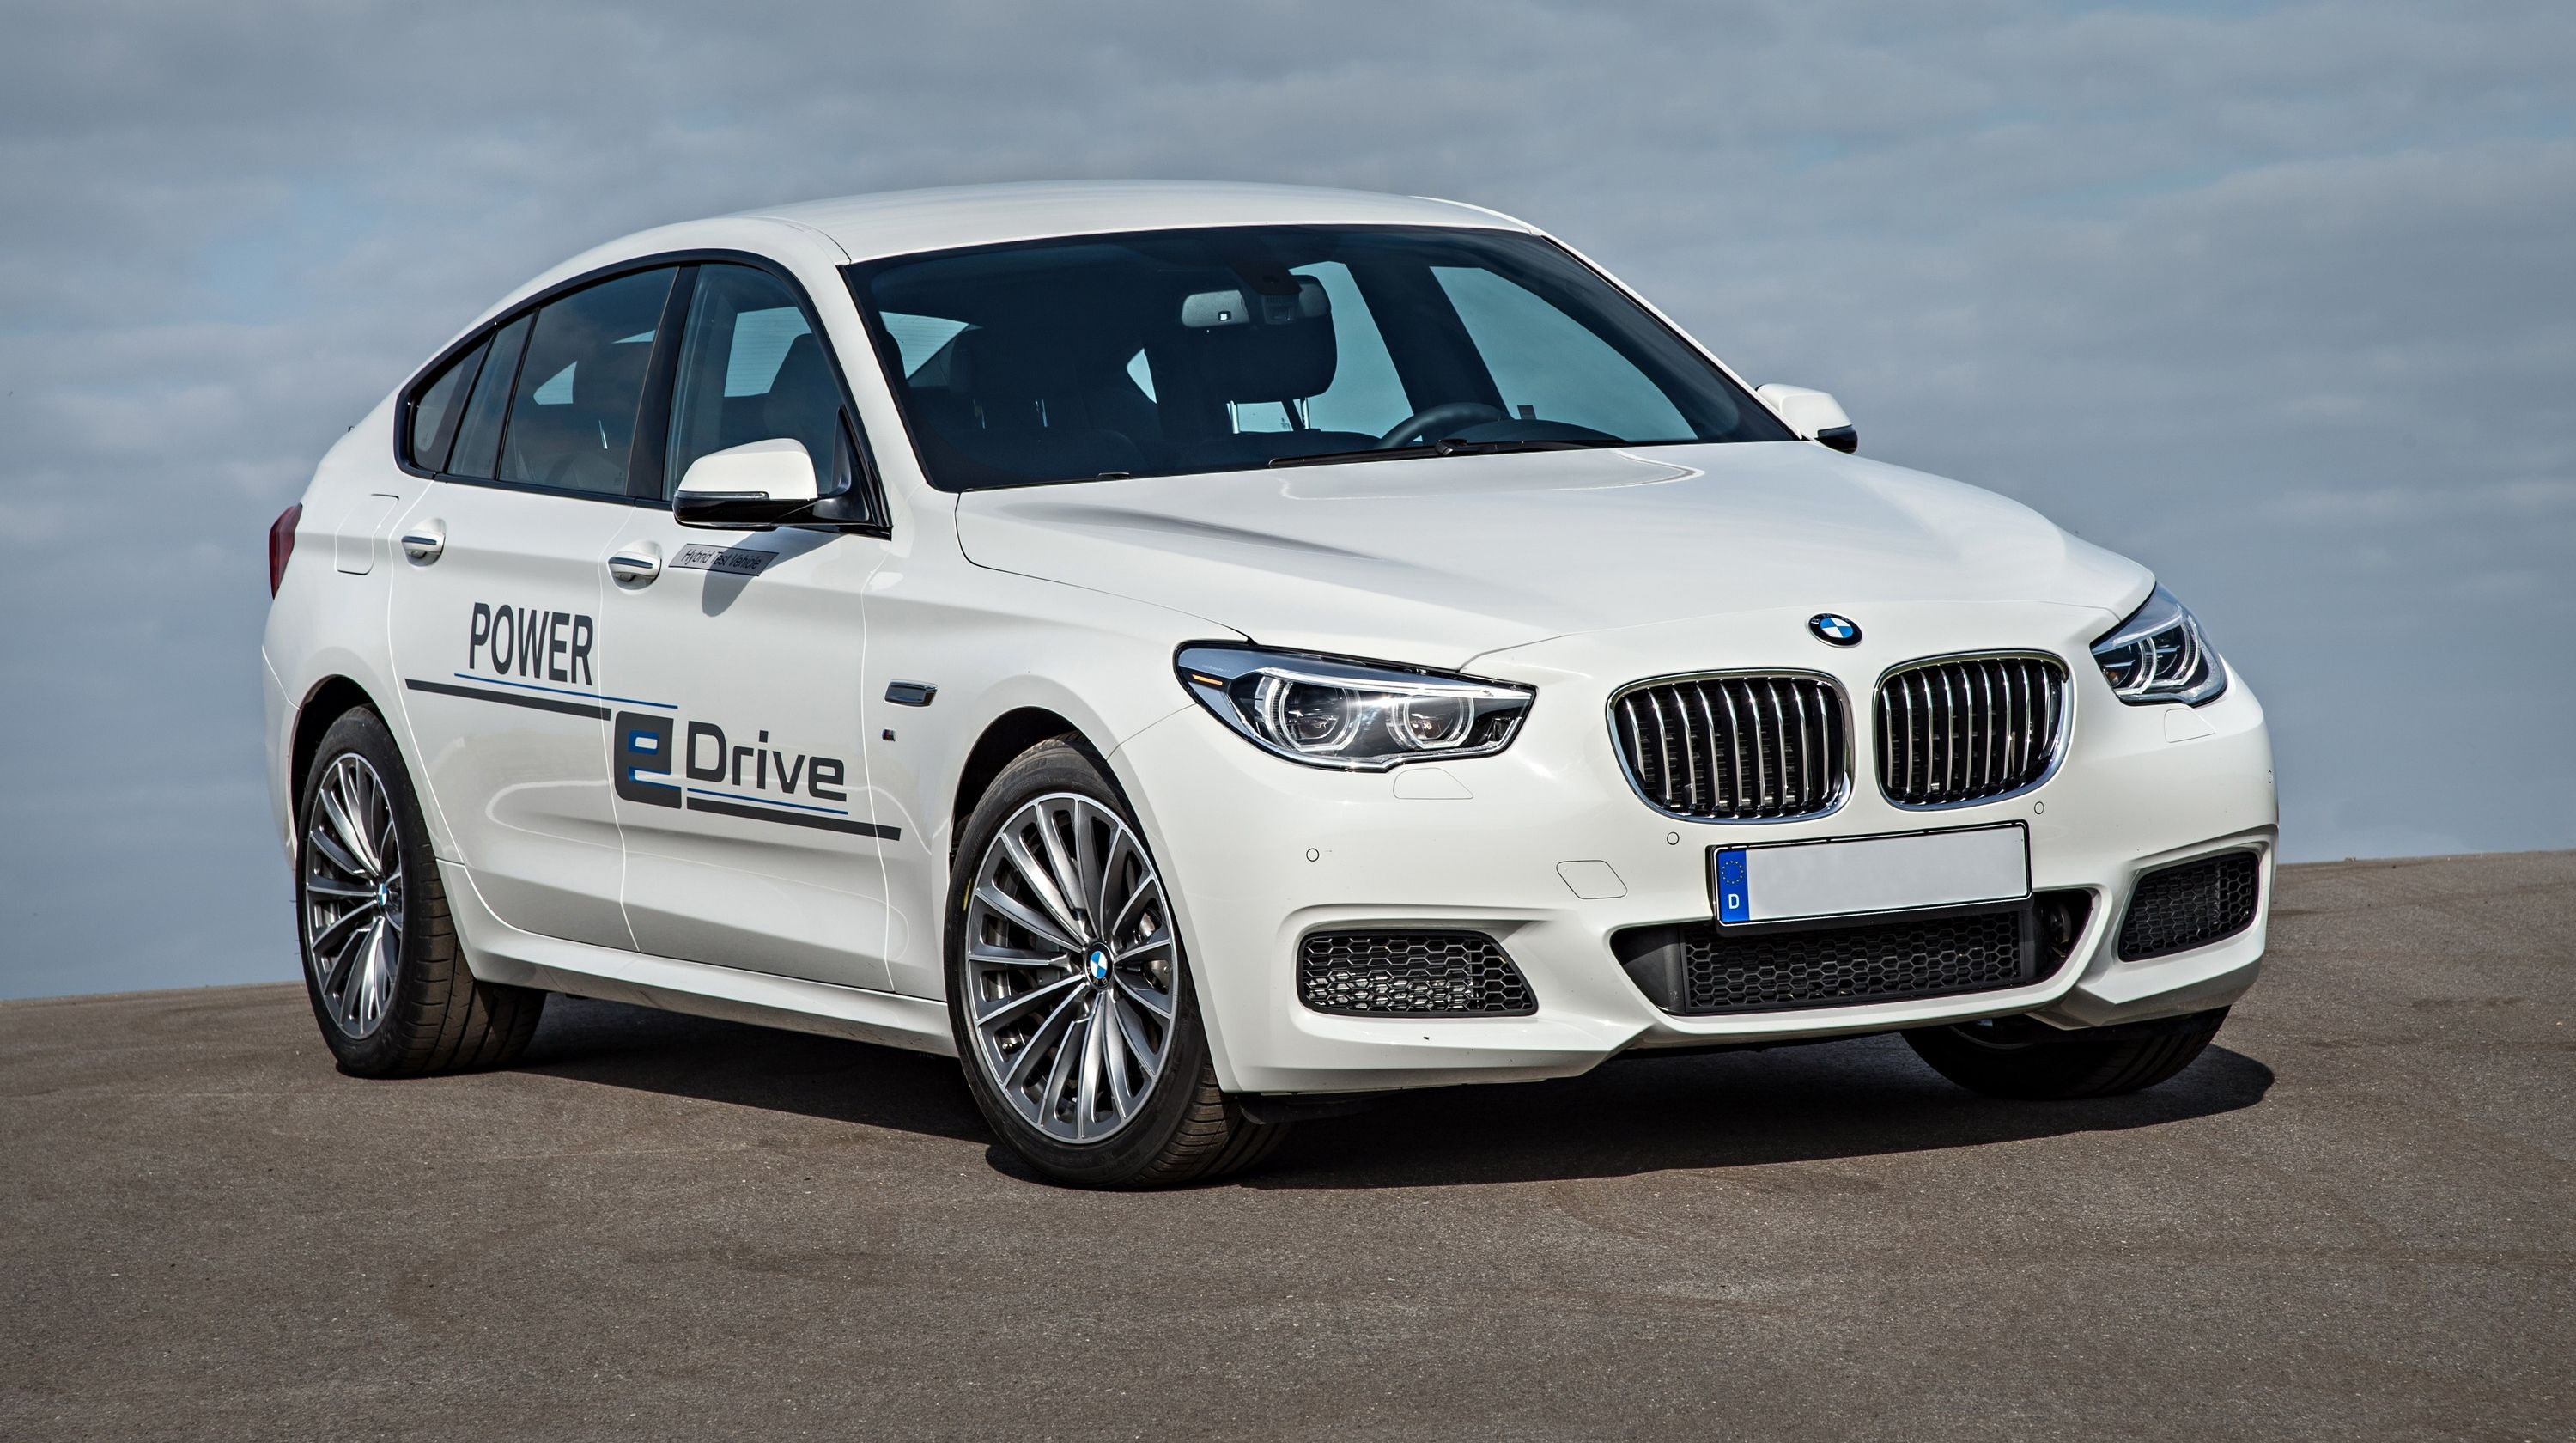  The EV world has gone completely crazy with this 680-horsepower 5 Series GT eDrive Concept.